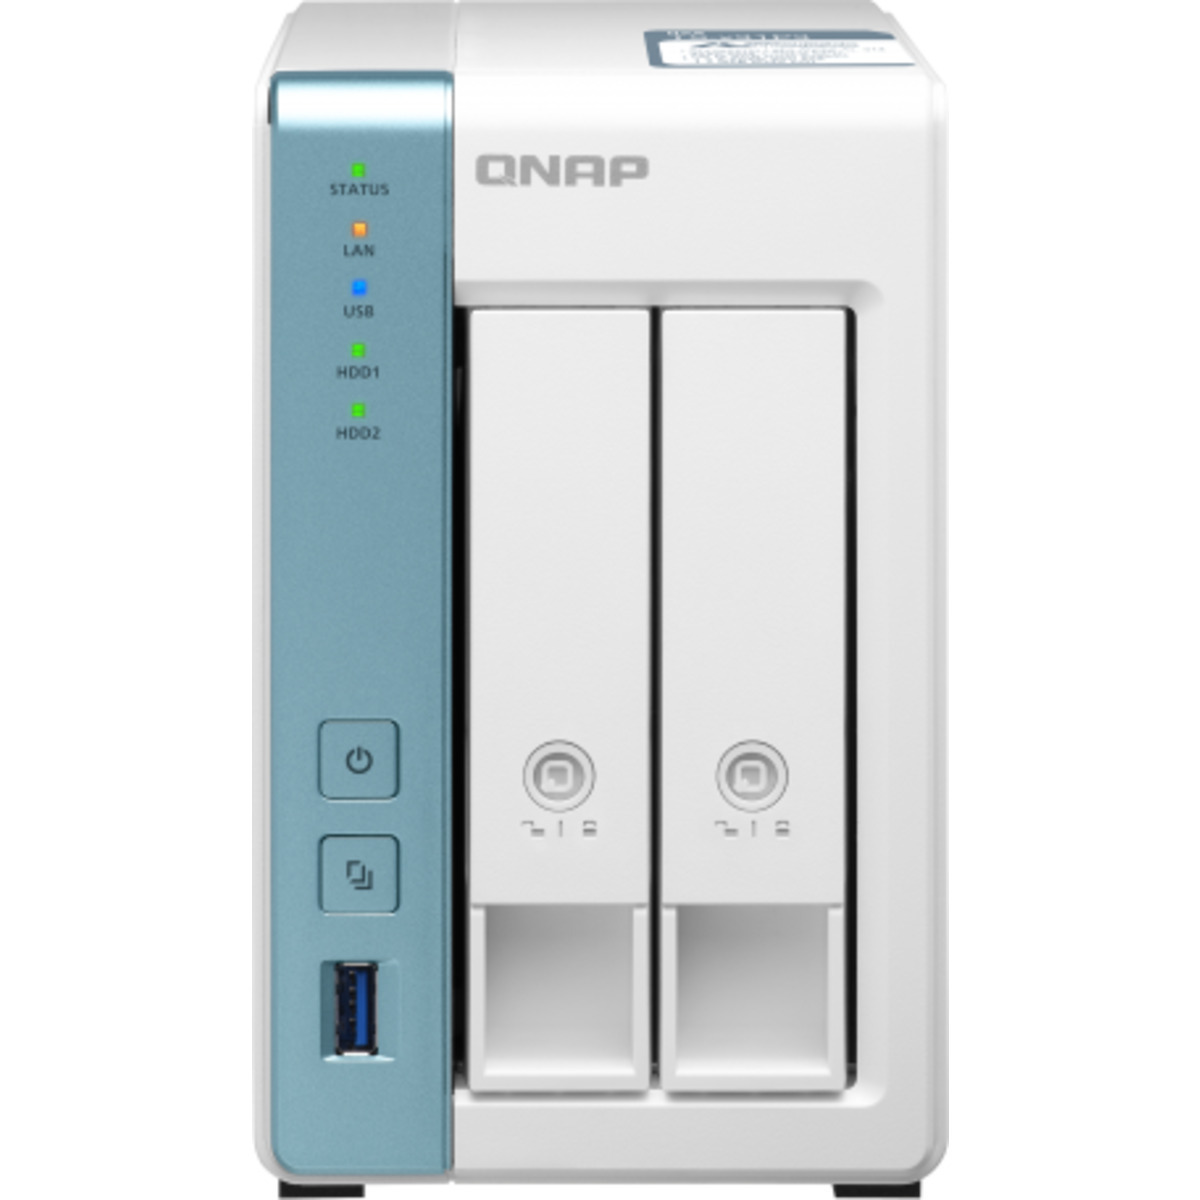 buy $502 QNAP TS-231P3 4tb Desktop NAS - Network Attached Storage Device 2x2000gb Seagate BarraCuda ST2000DM008 3.5 7200rpm SATA 6Gb/s HDD CONSUMER Class Drives Installed - Burn-In Tested - ON SALE - FREE RAM UPGRADE - nas headquarters buy network attached storage server device das new raid-5 free shipping usa christmas new year holiday sale TS-231P3